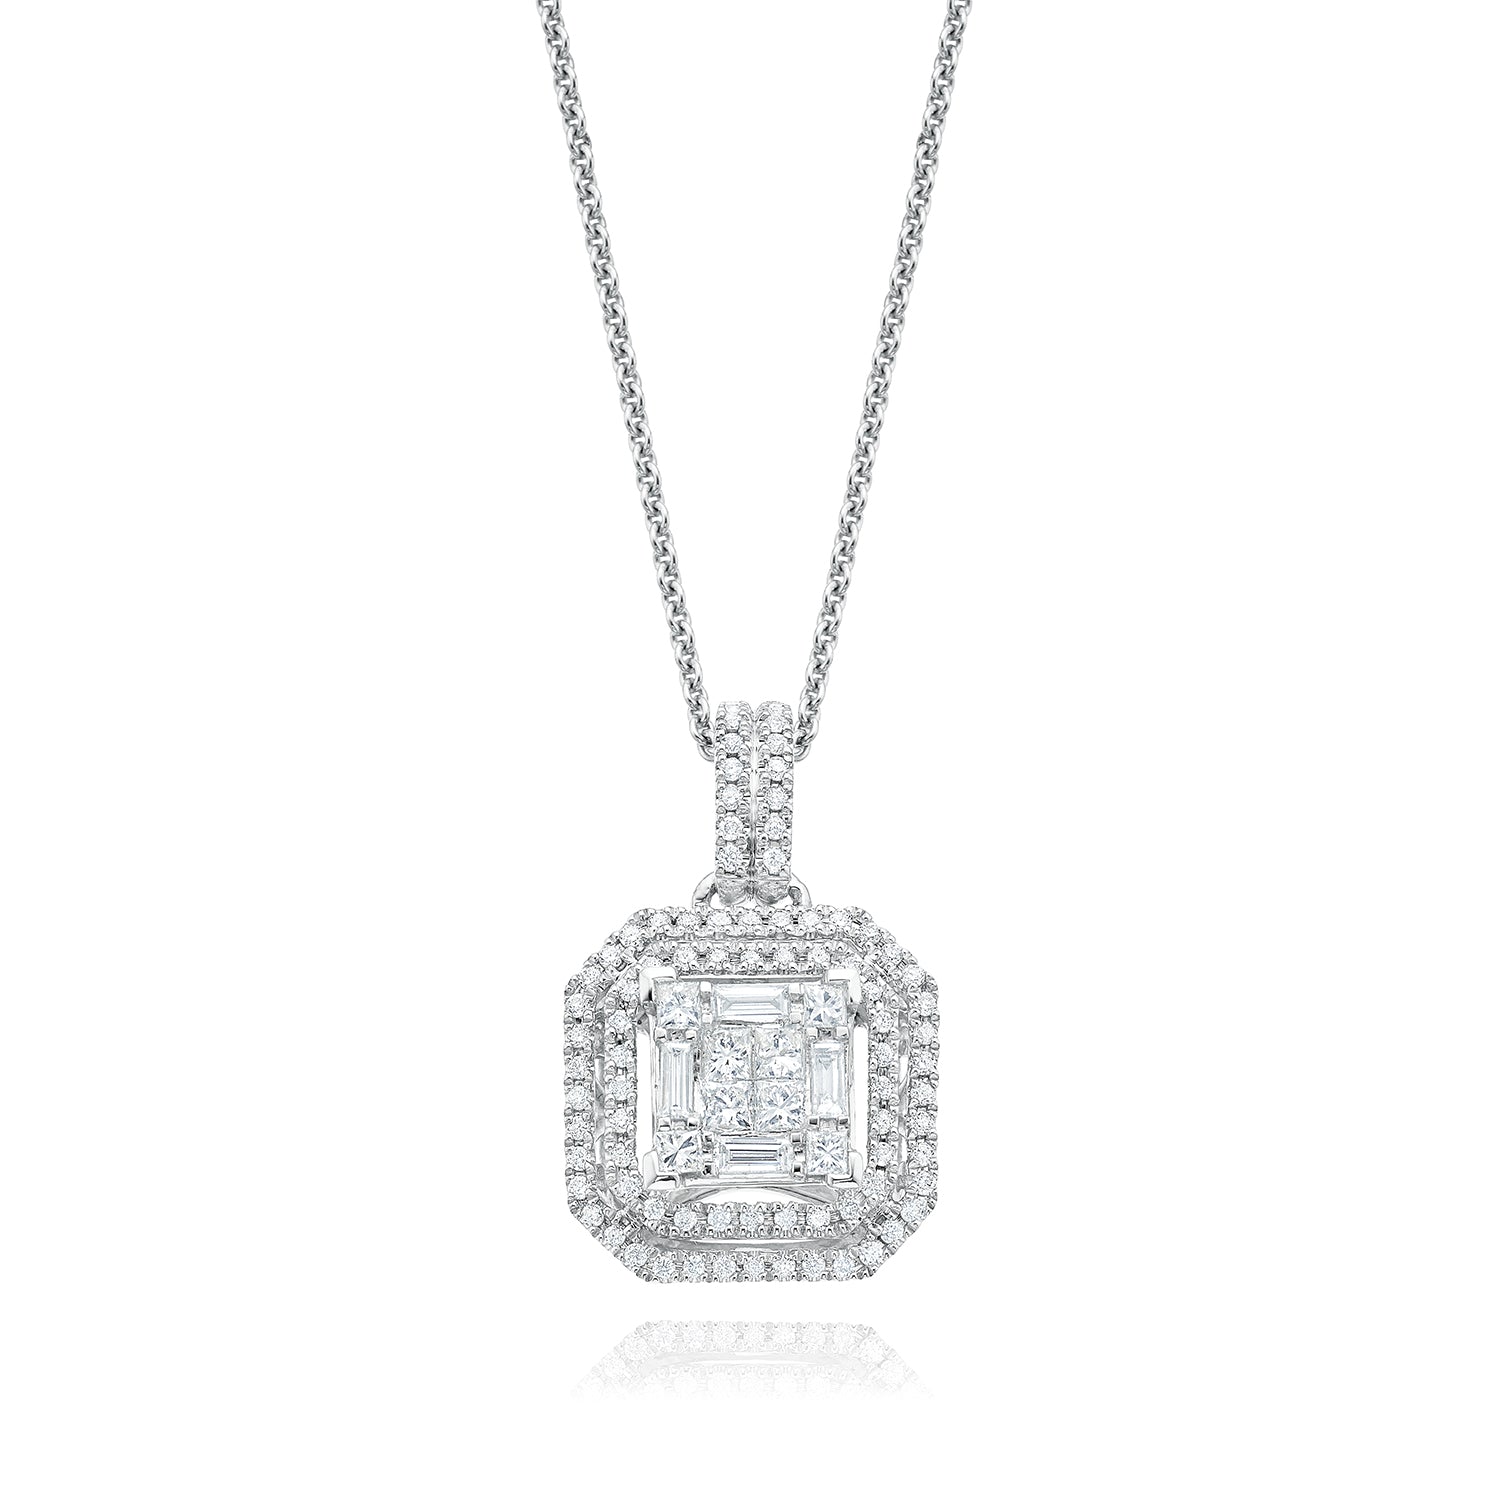 1/2 CT Diamond Solitaire Pendant Necklace in 14K White Gold with a 14K  White Gold Adjustable 16